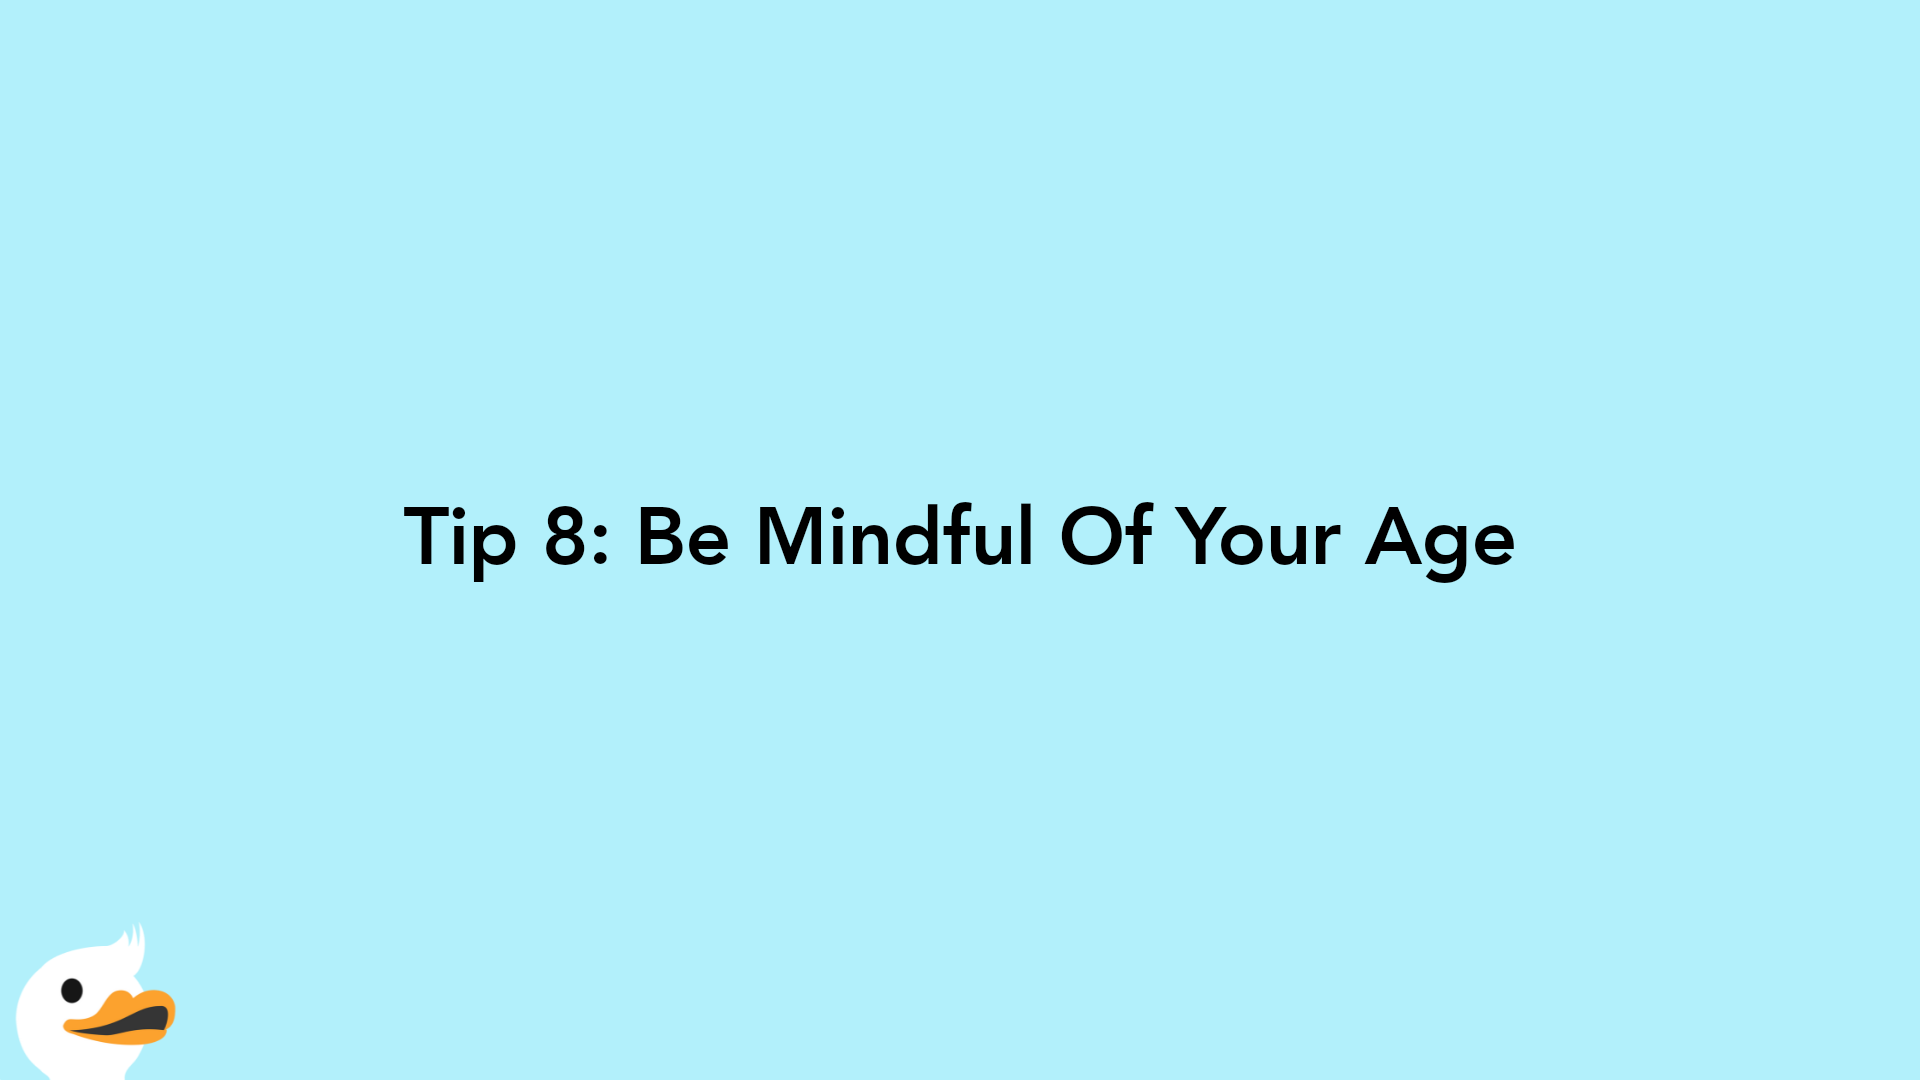 Tip 8: Be Mindful Of Your Age